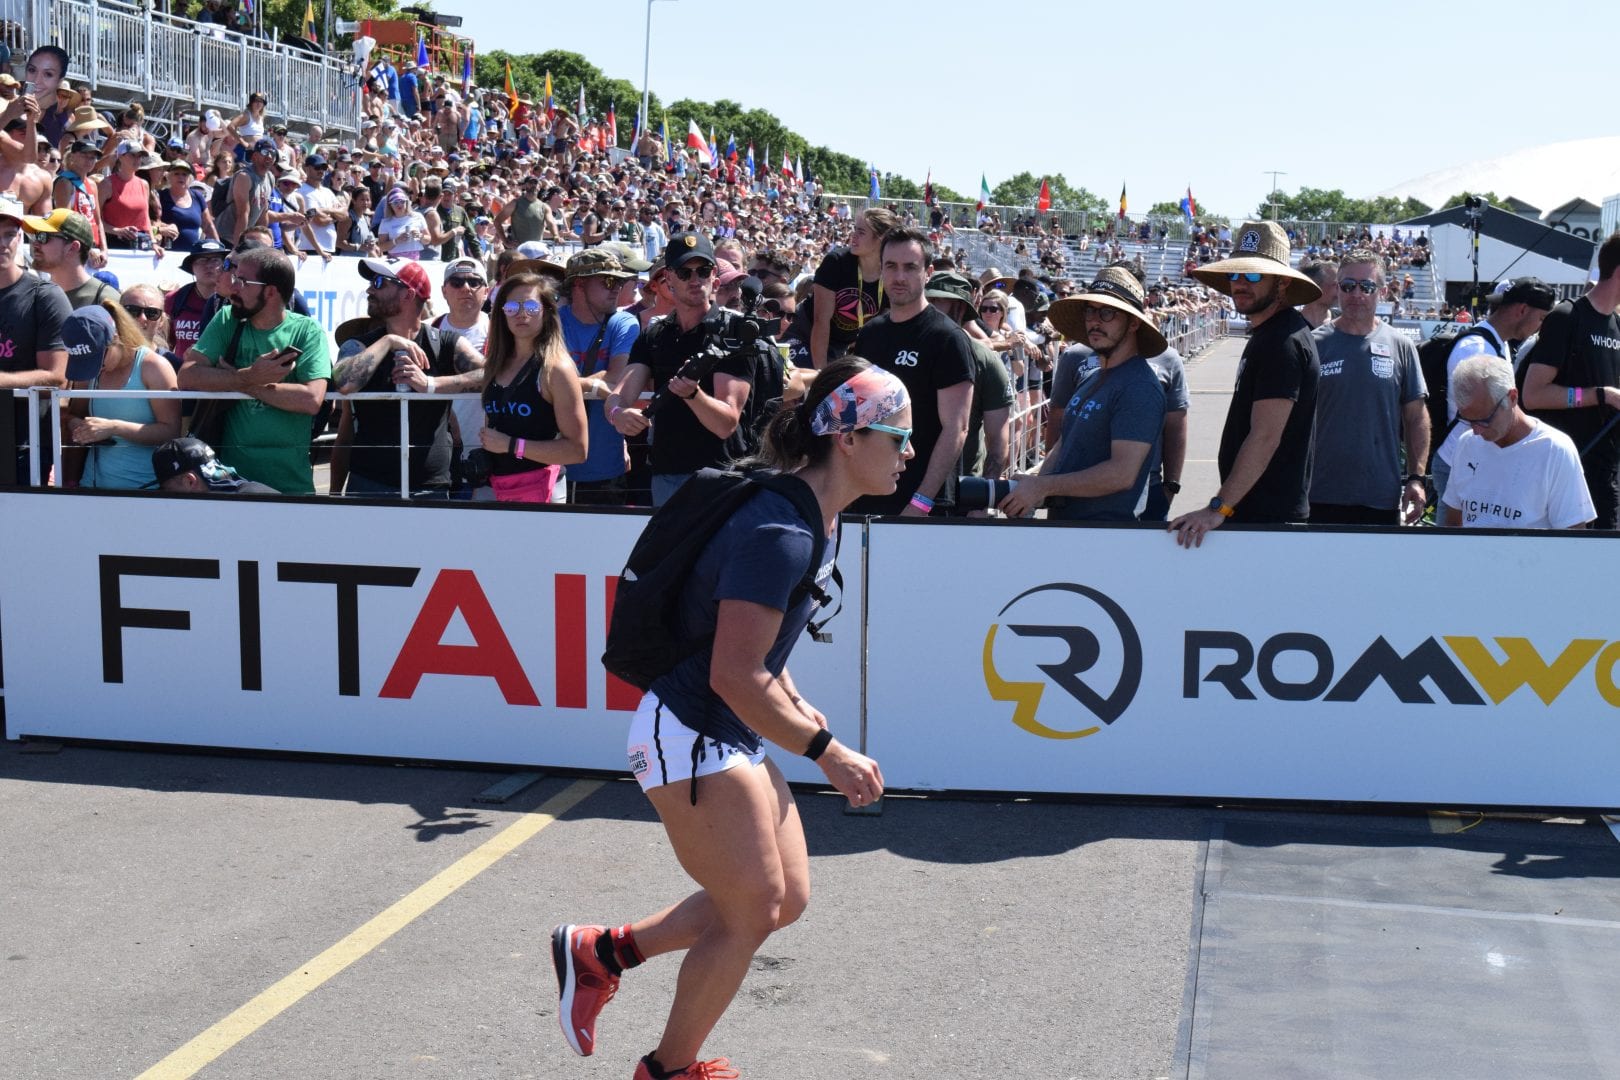 Katie Trombetta competes in the Ruck Run event at the 2019 CrossFit Games